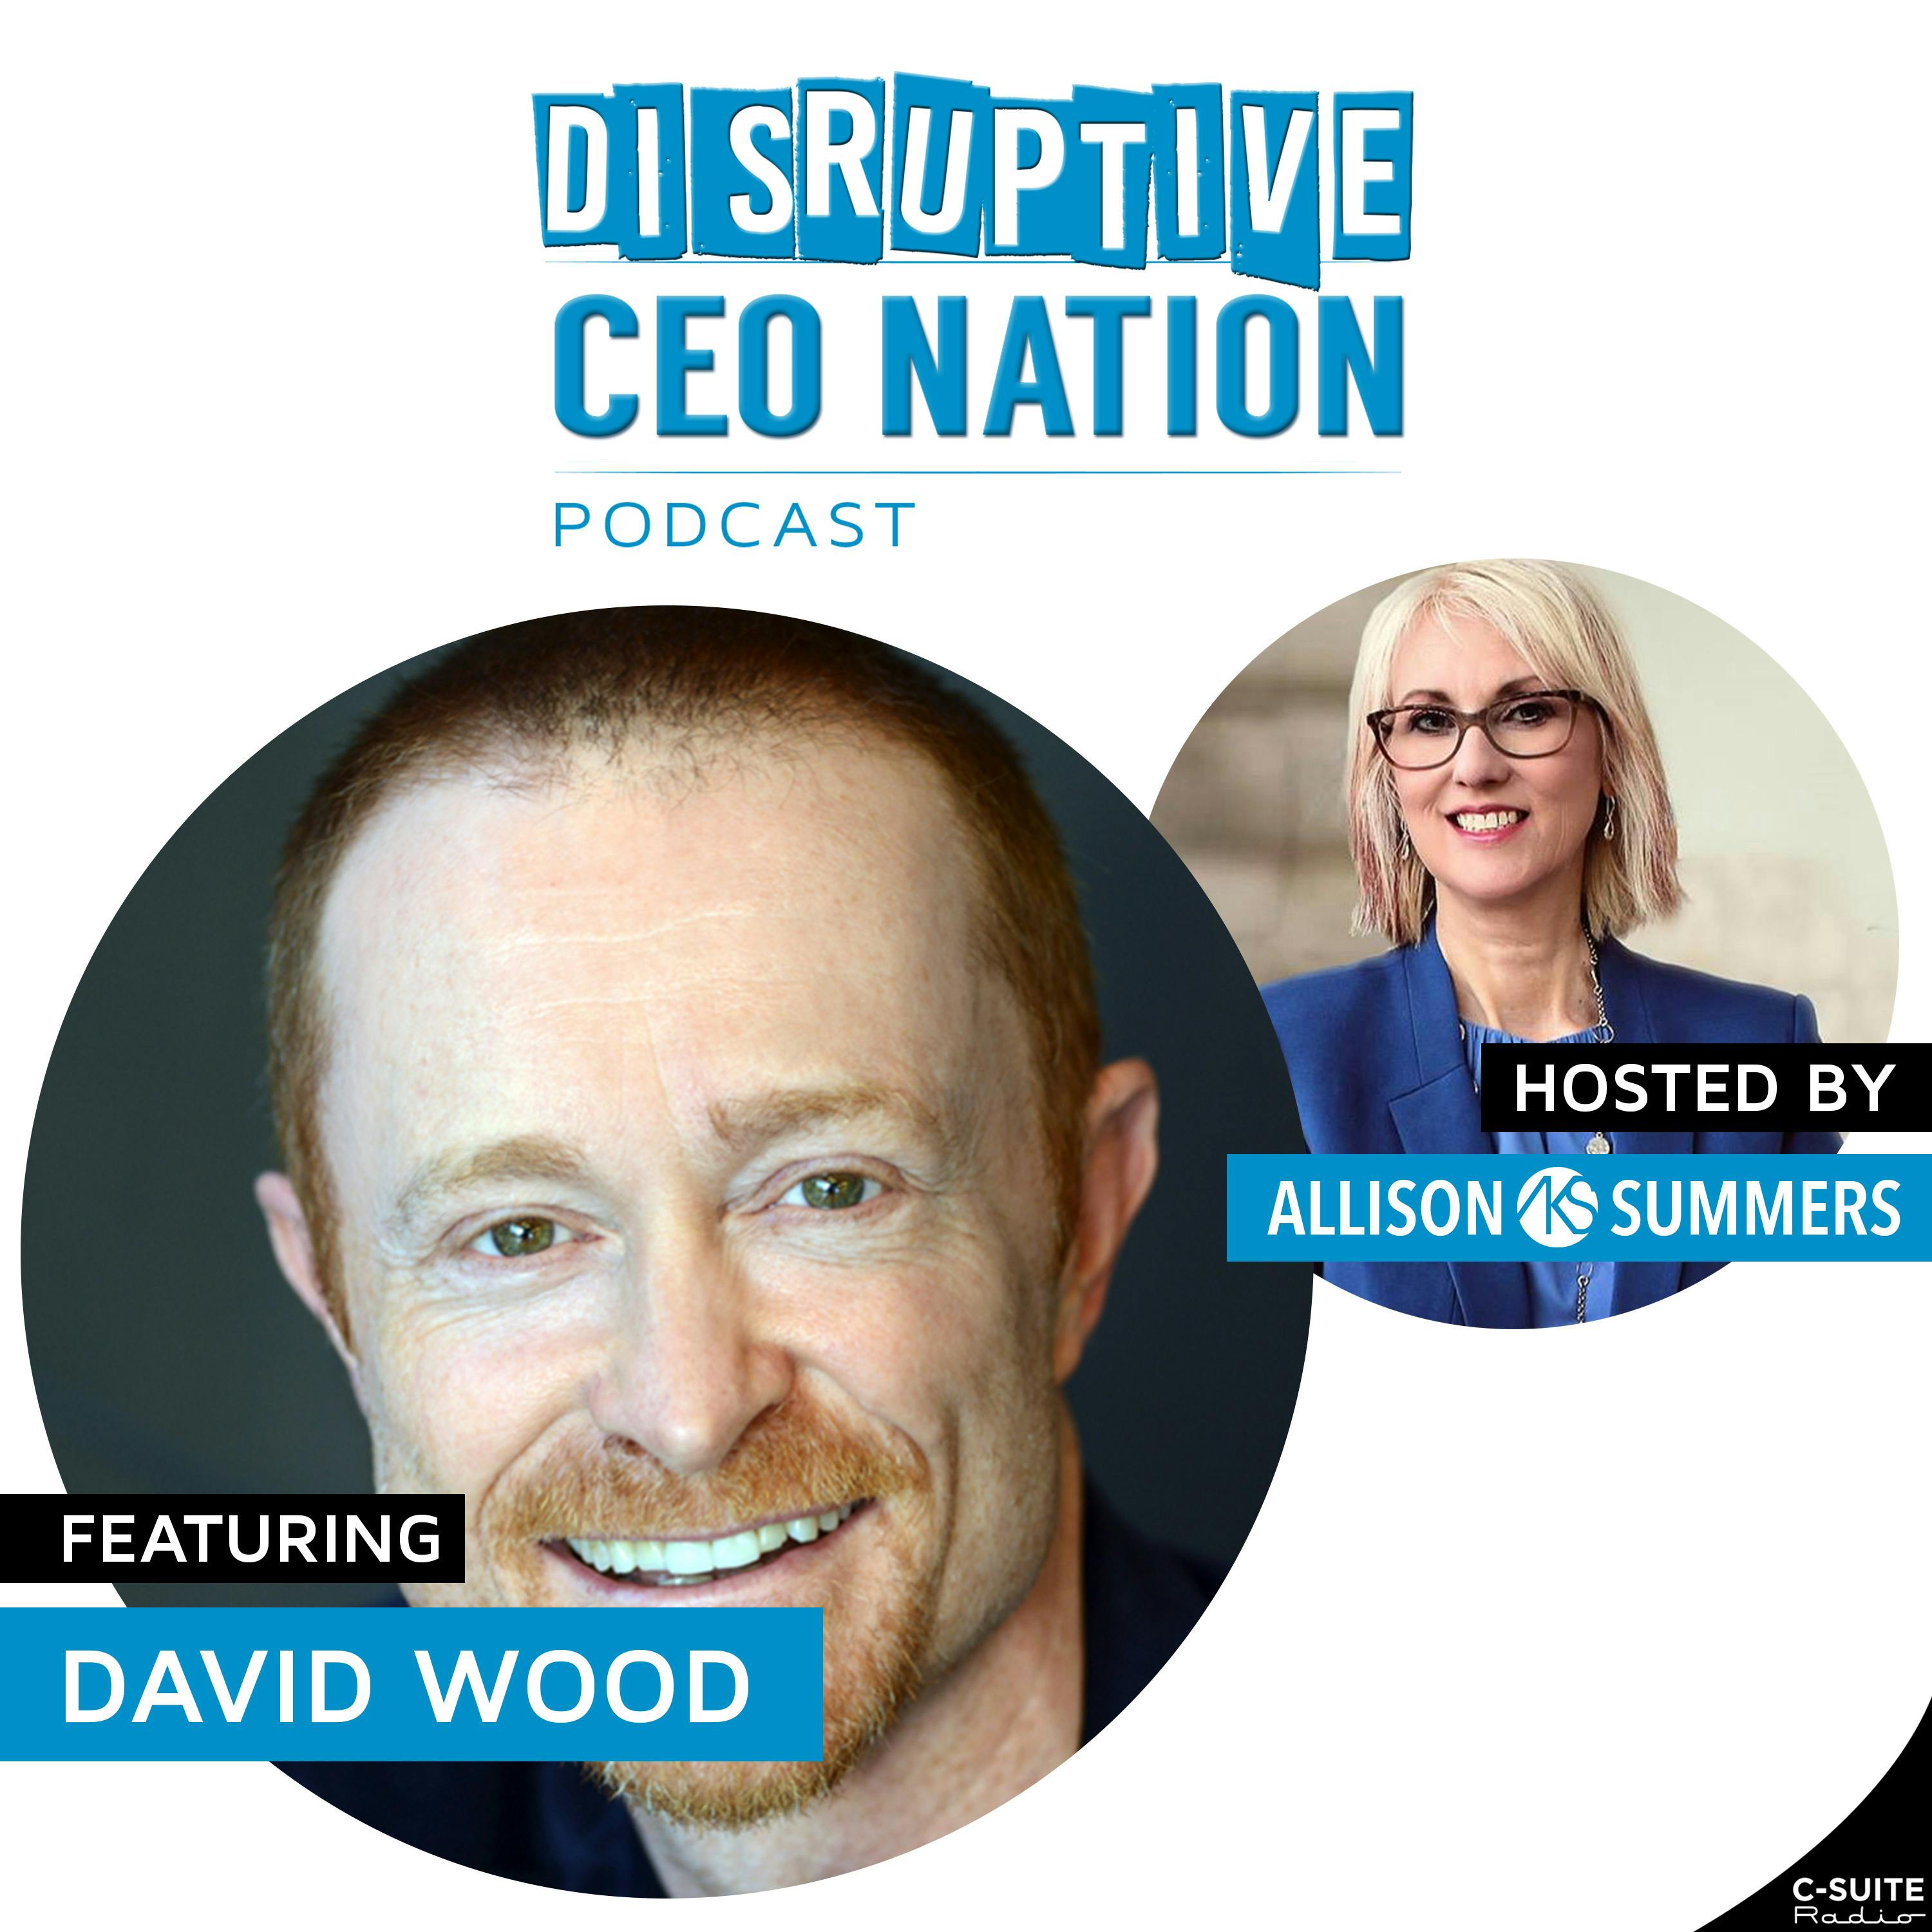 EP 116: Disruptive CEO Nation Podcast with Allison K. Summers Image